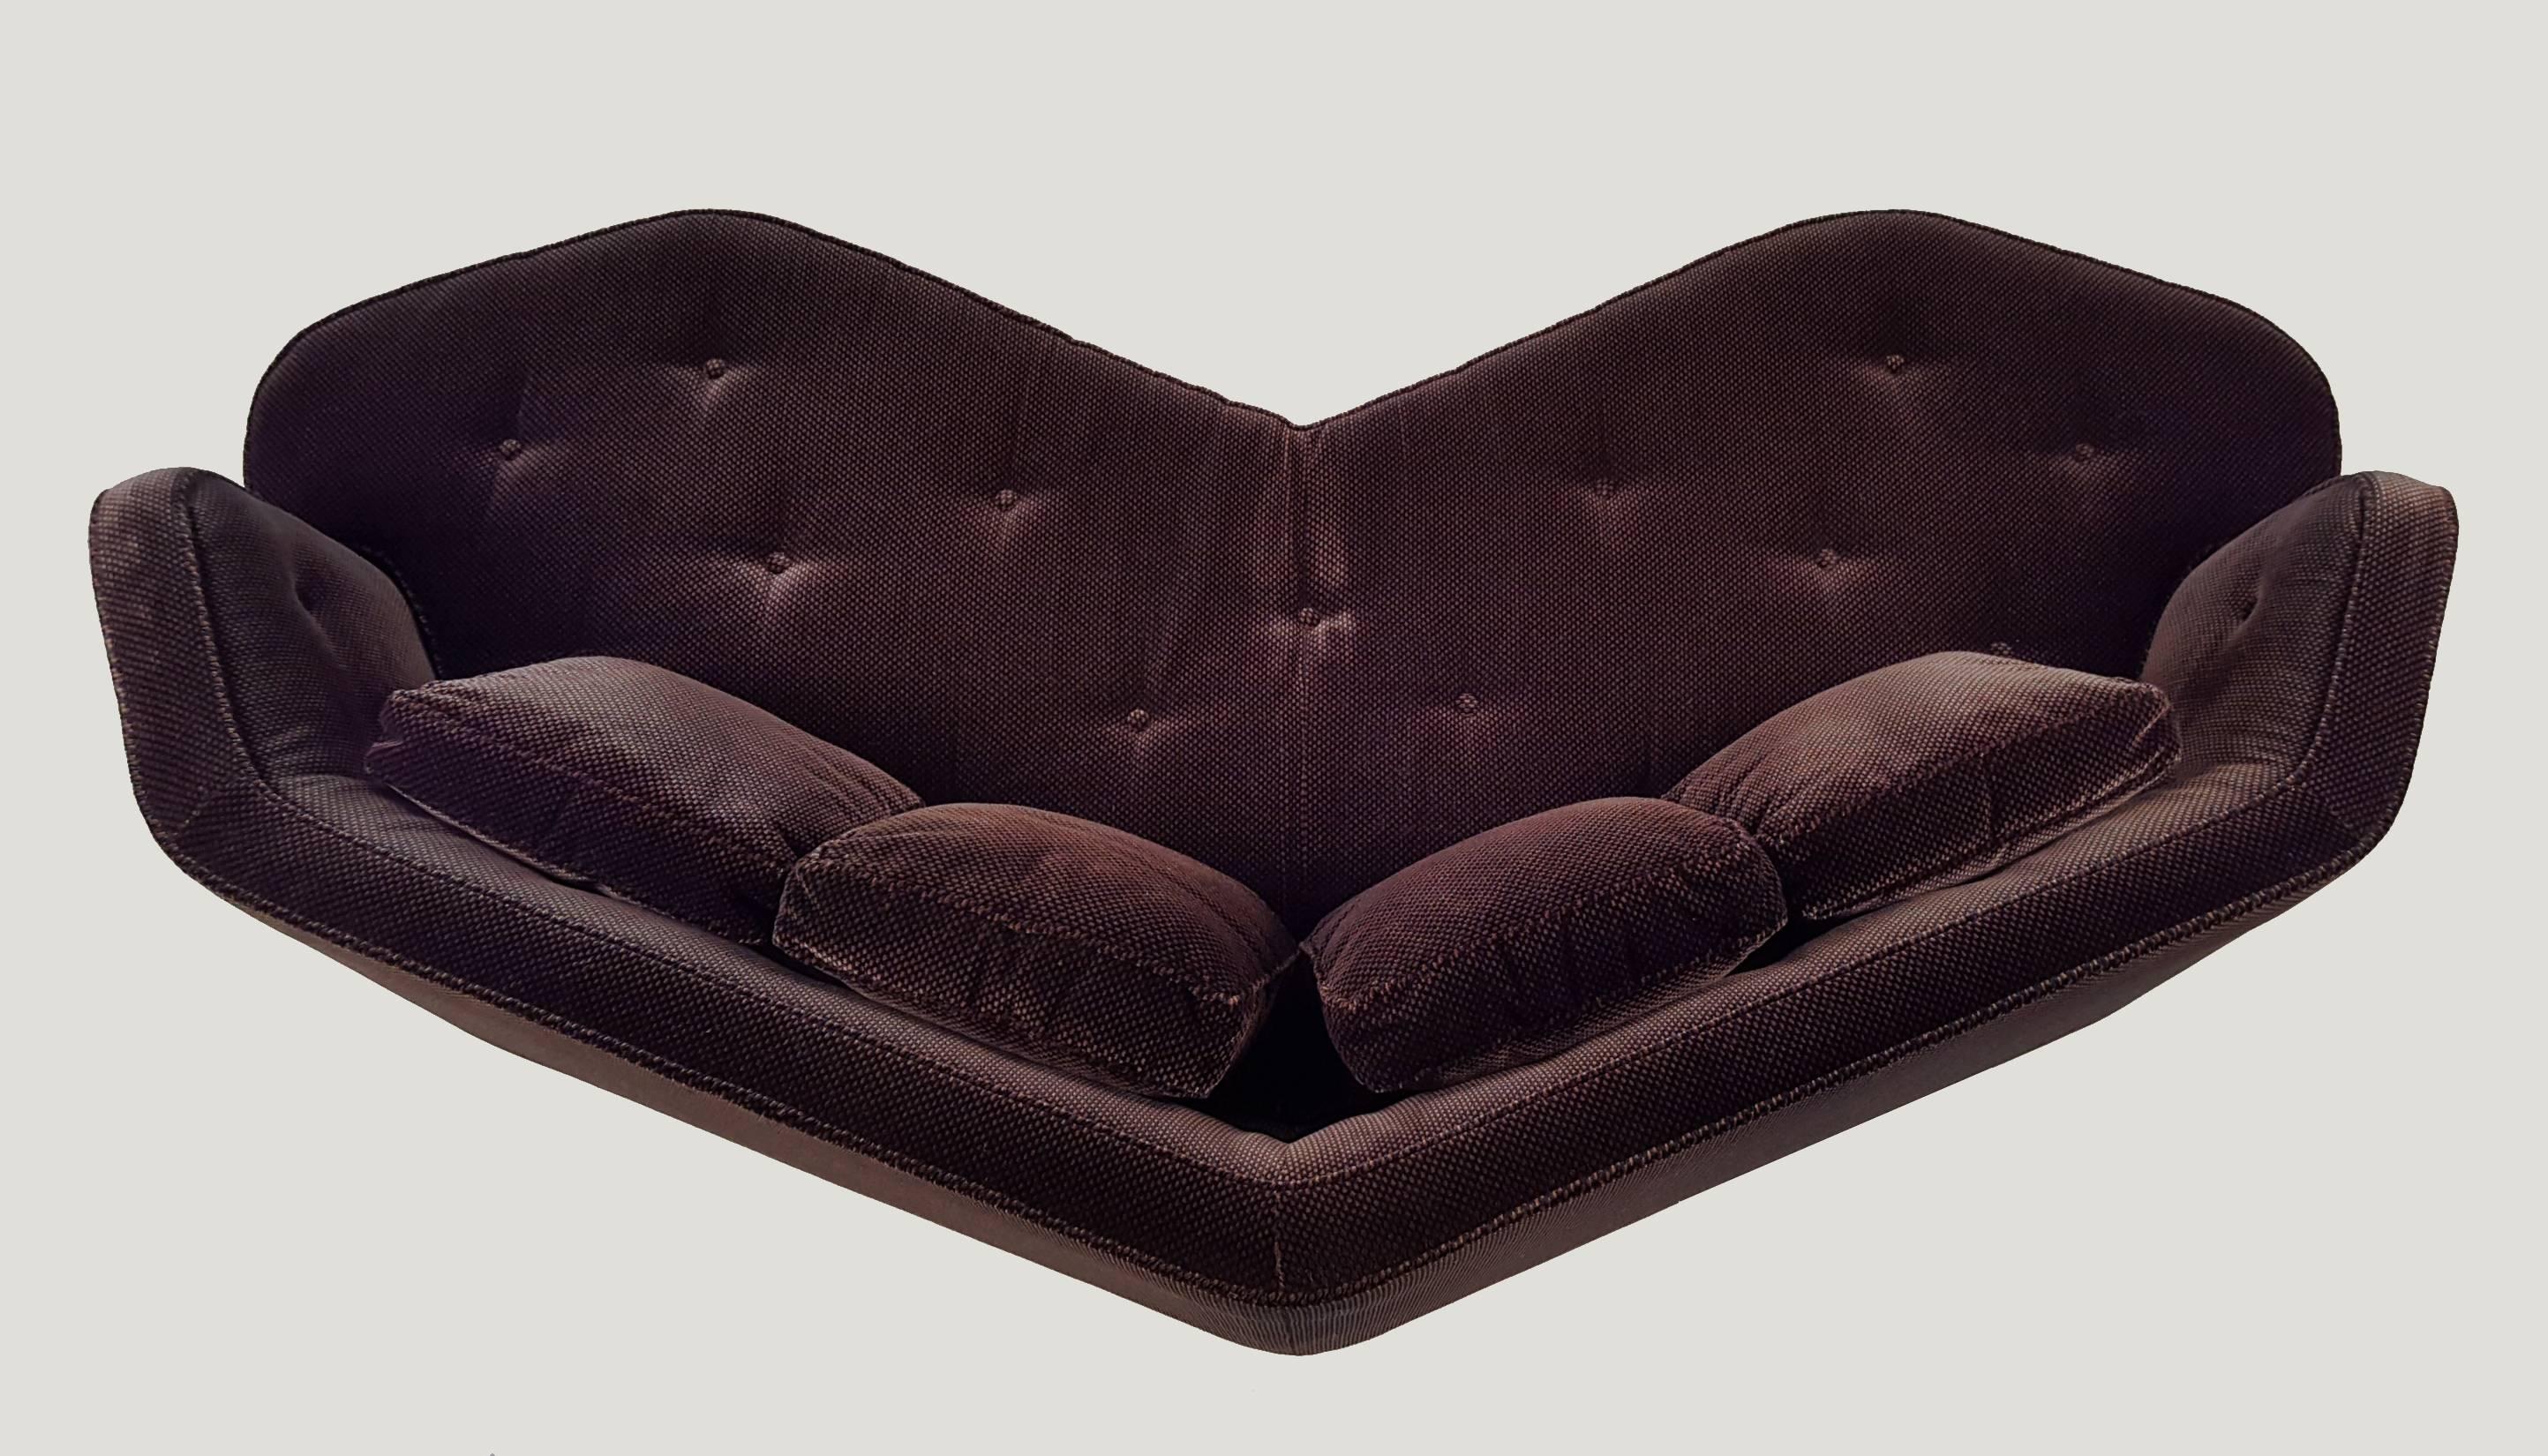 Edward Wormley Janus collection faceted sofa. Sexy from every angle.